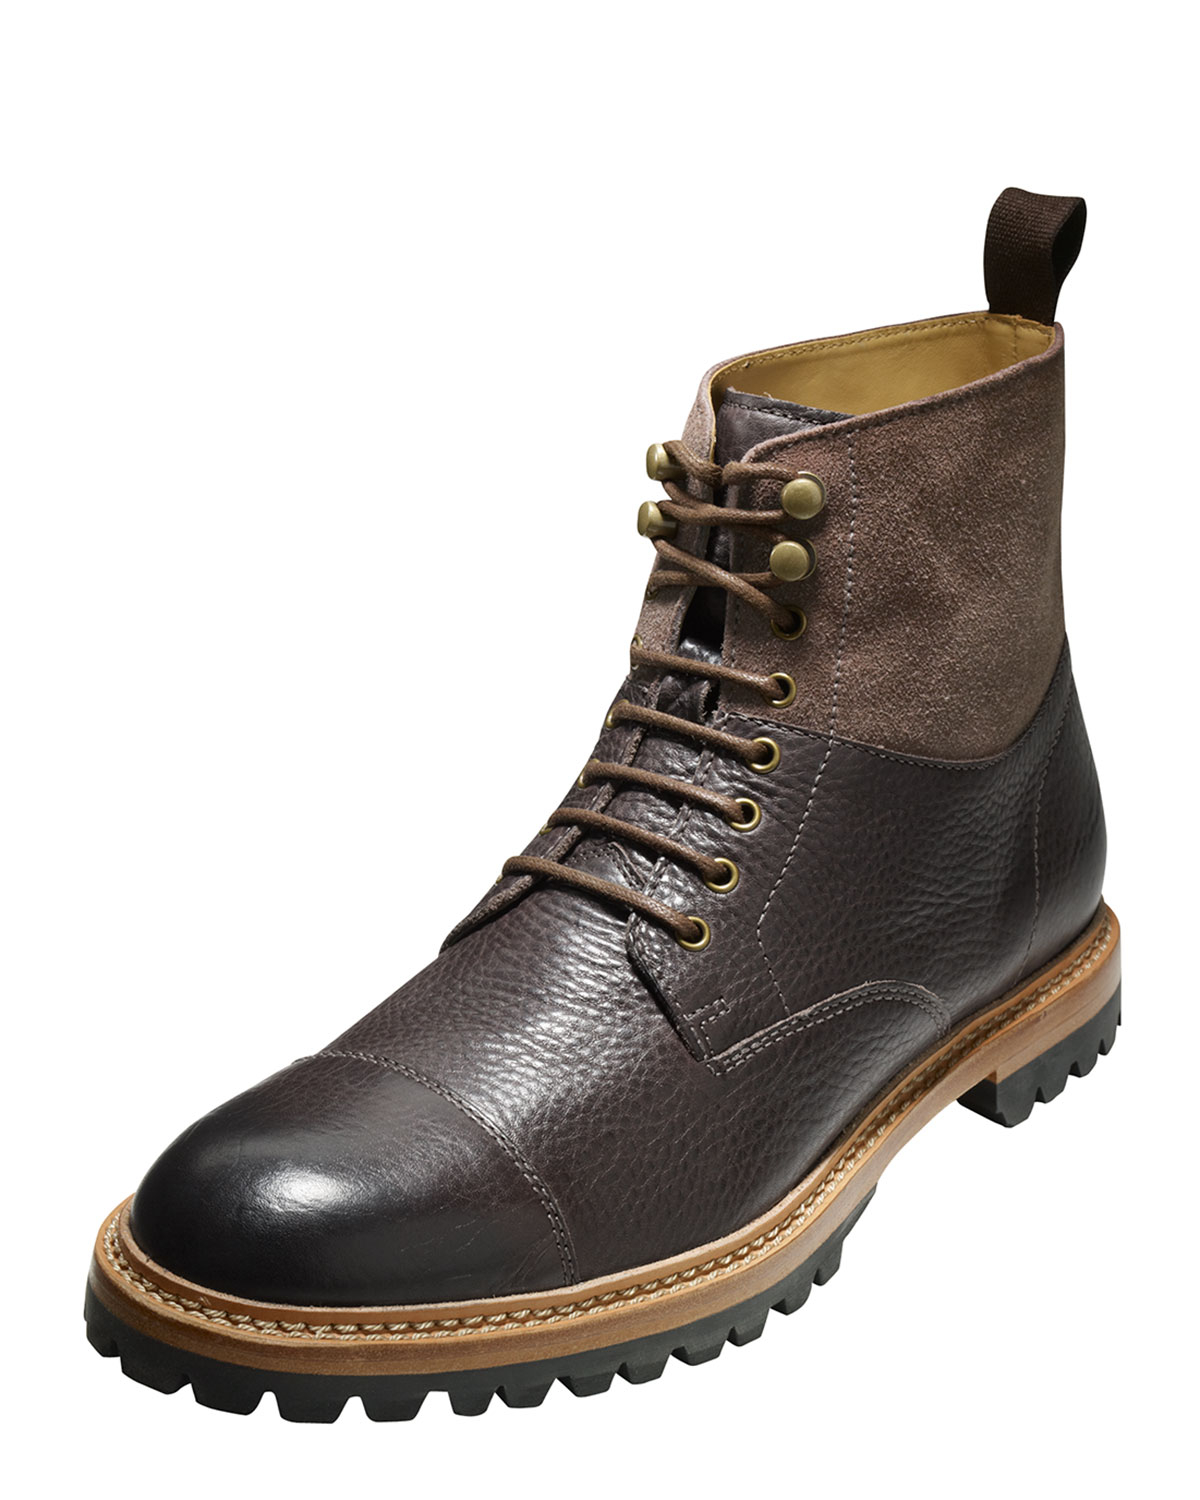 Cole Haan Boots For Men - www.inf-inet.com